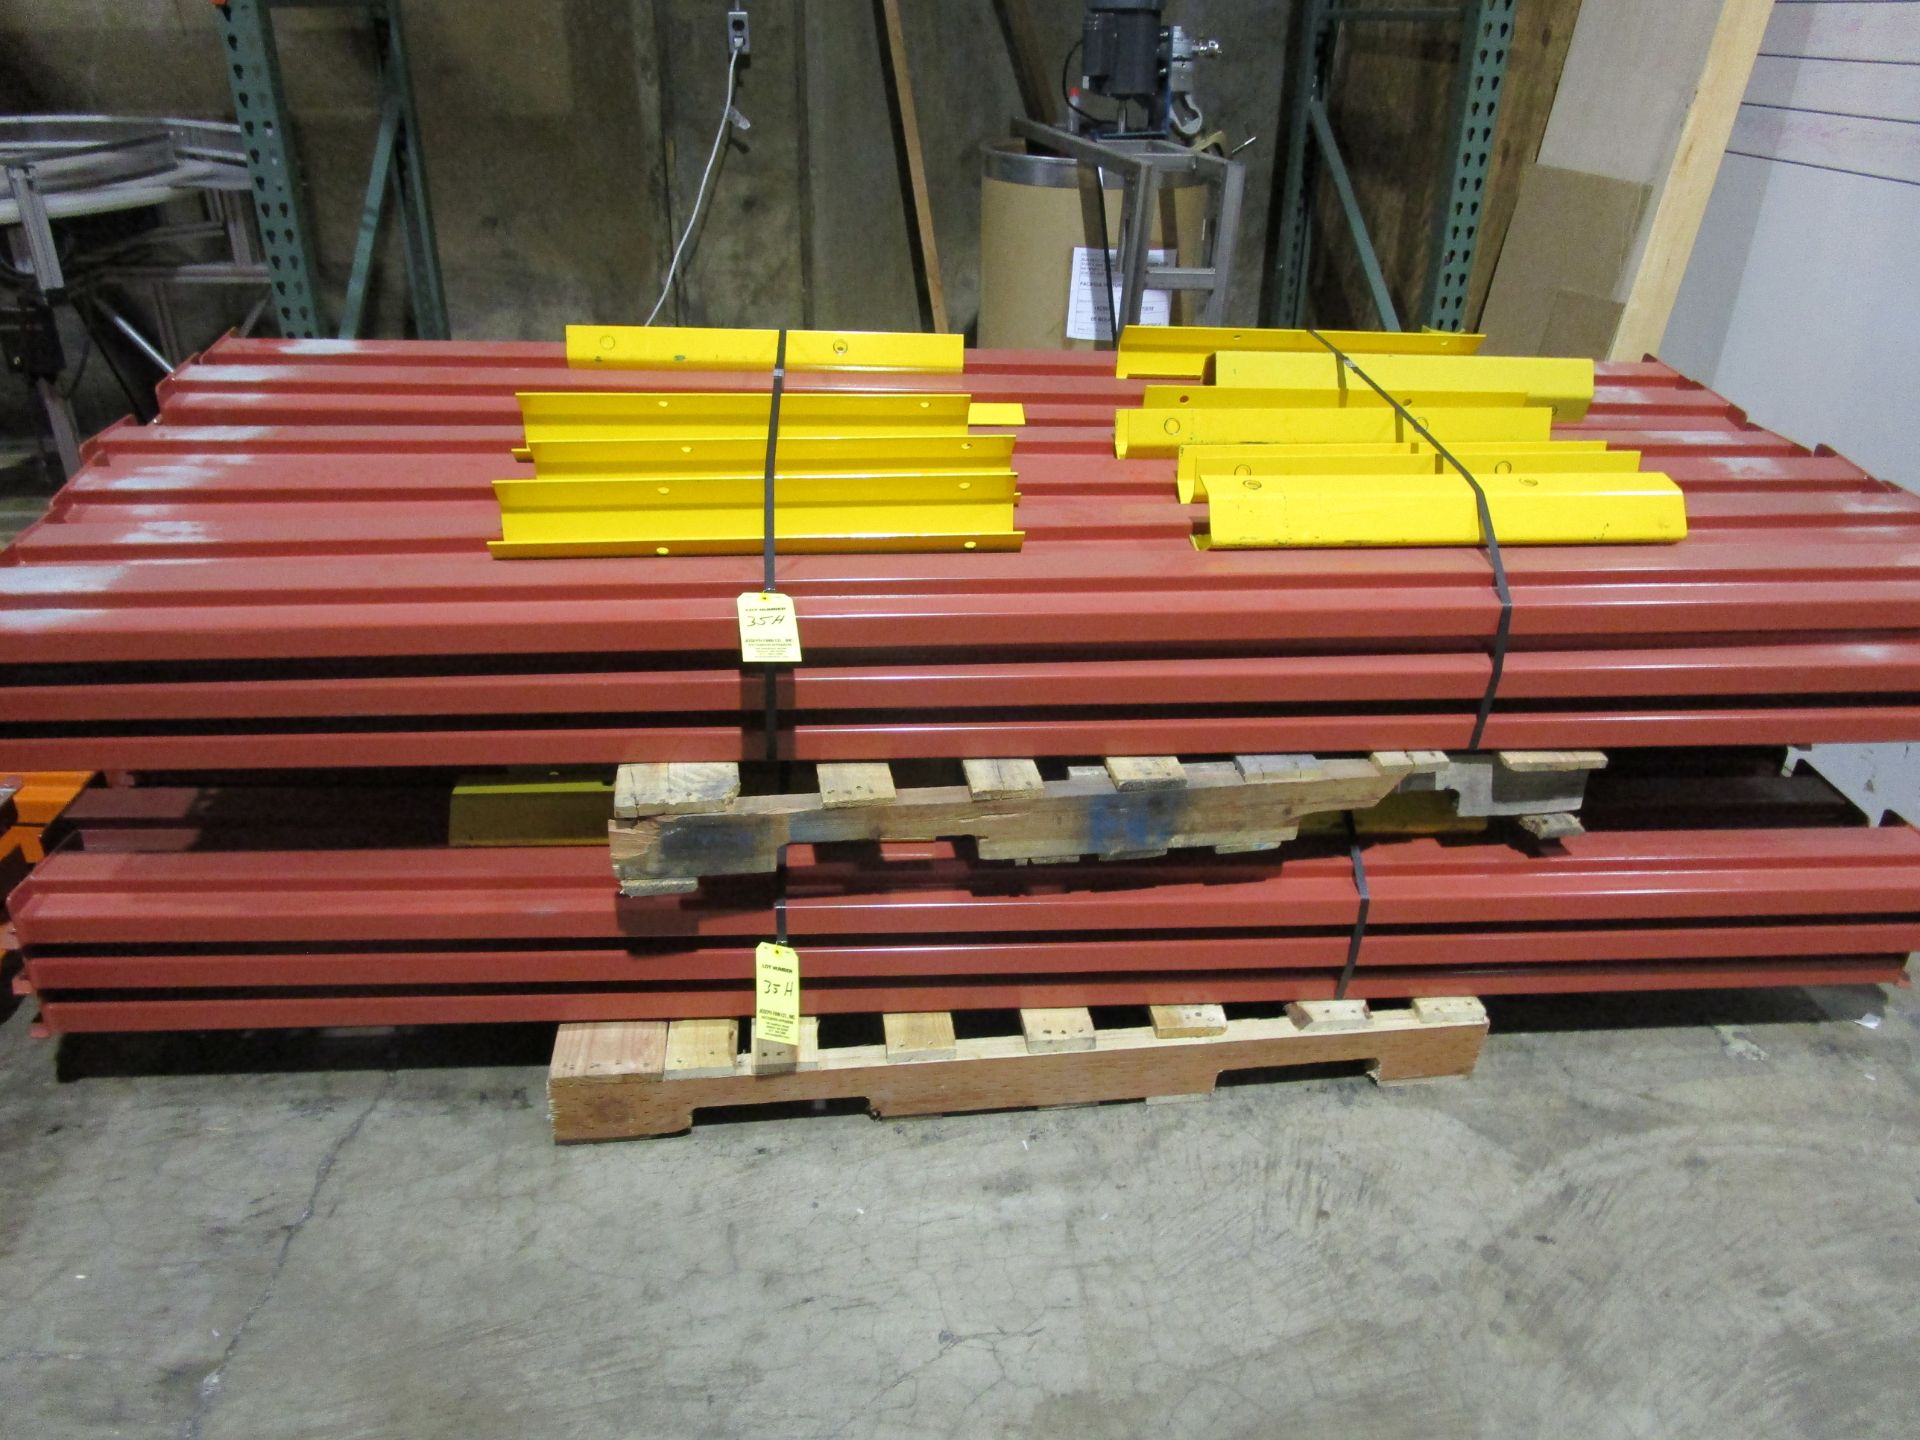 Approx. (70) Asst. 8' Beams - Subject to Bulk Bid Lot 35 - The greater of the aggr | Buyer to Remove